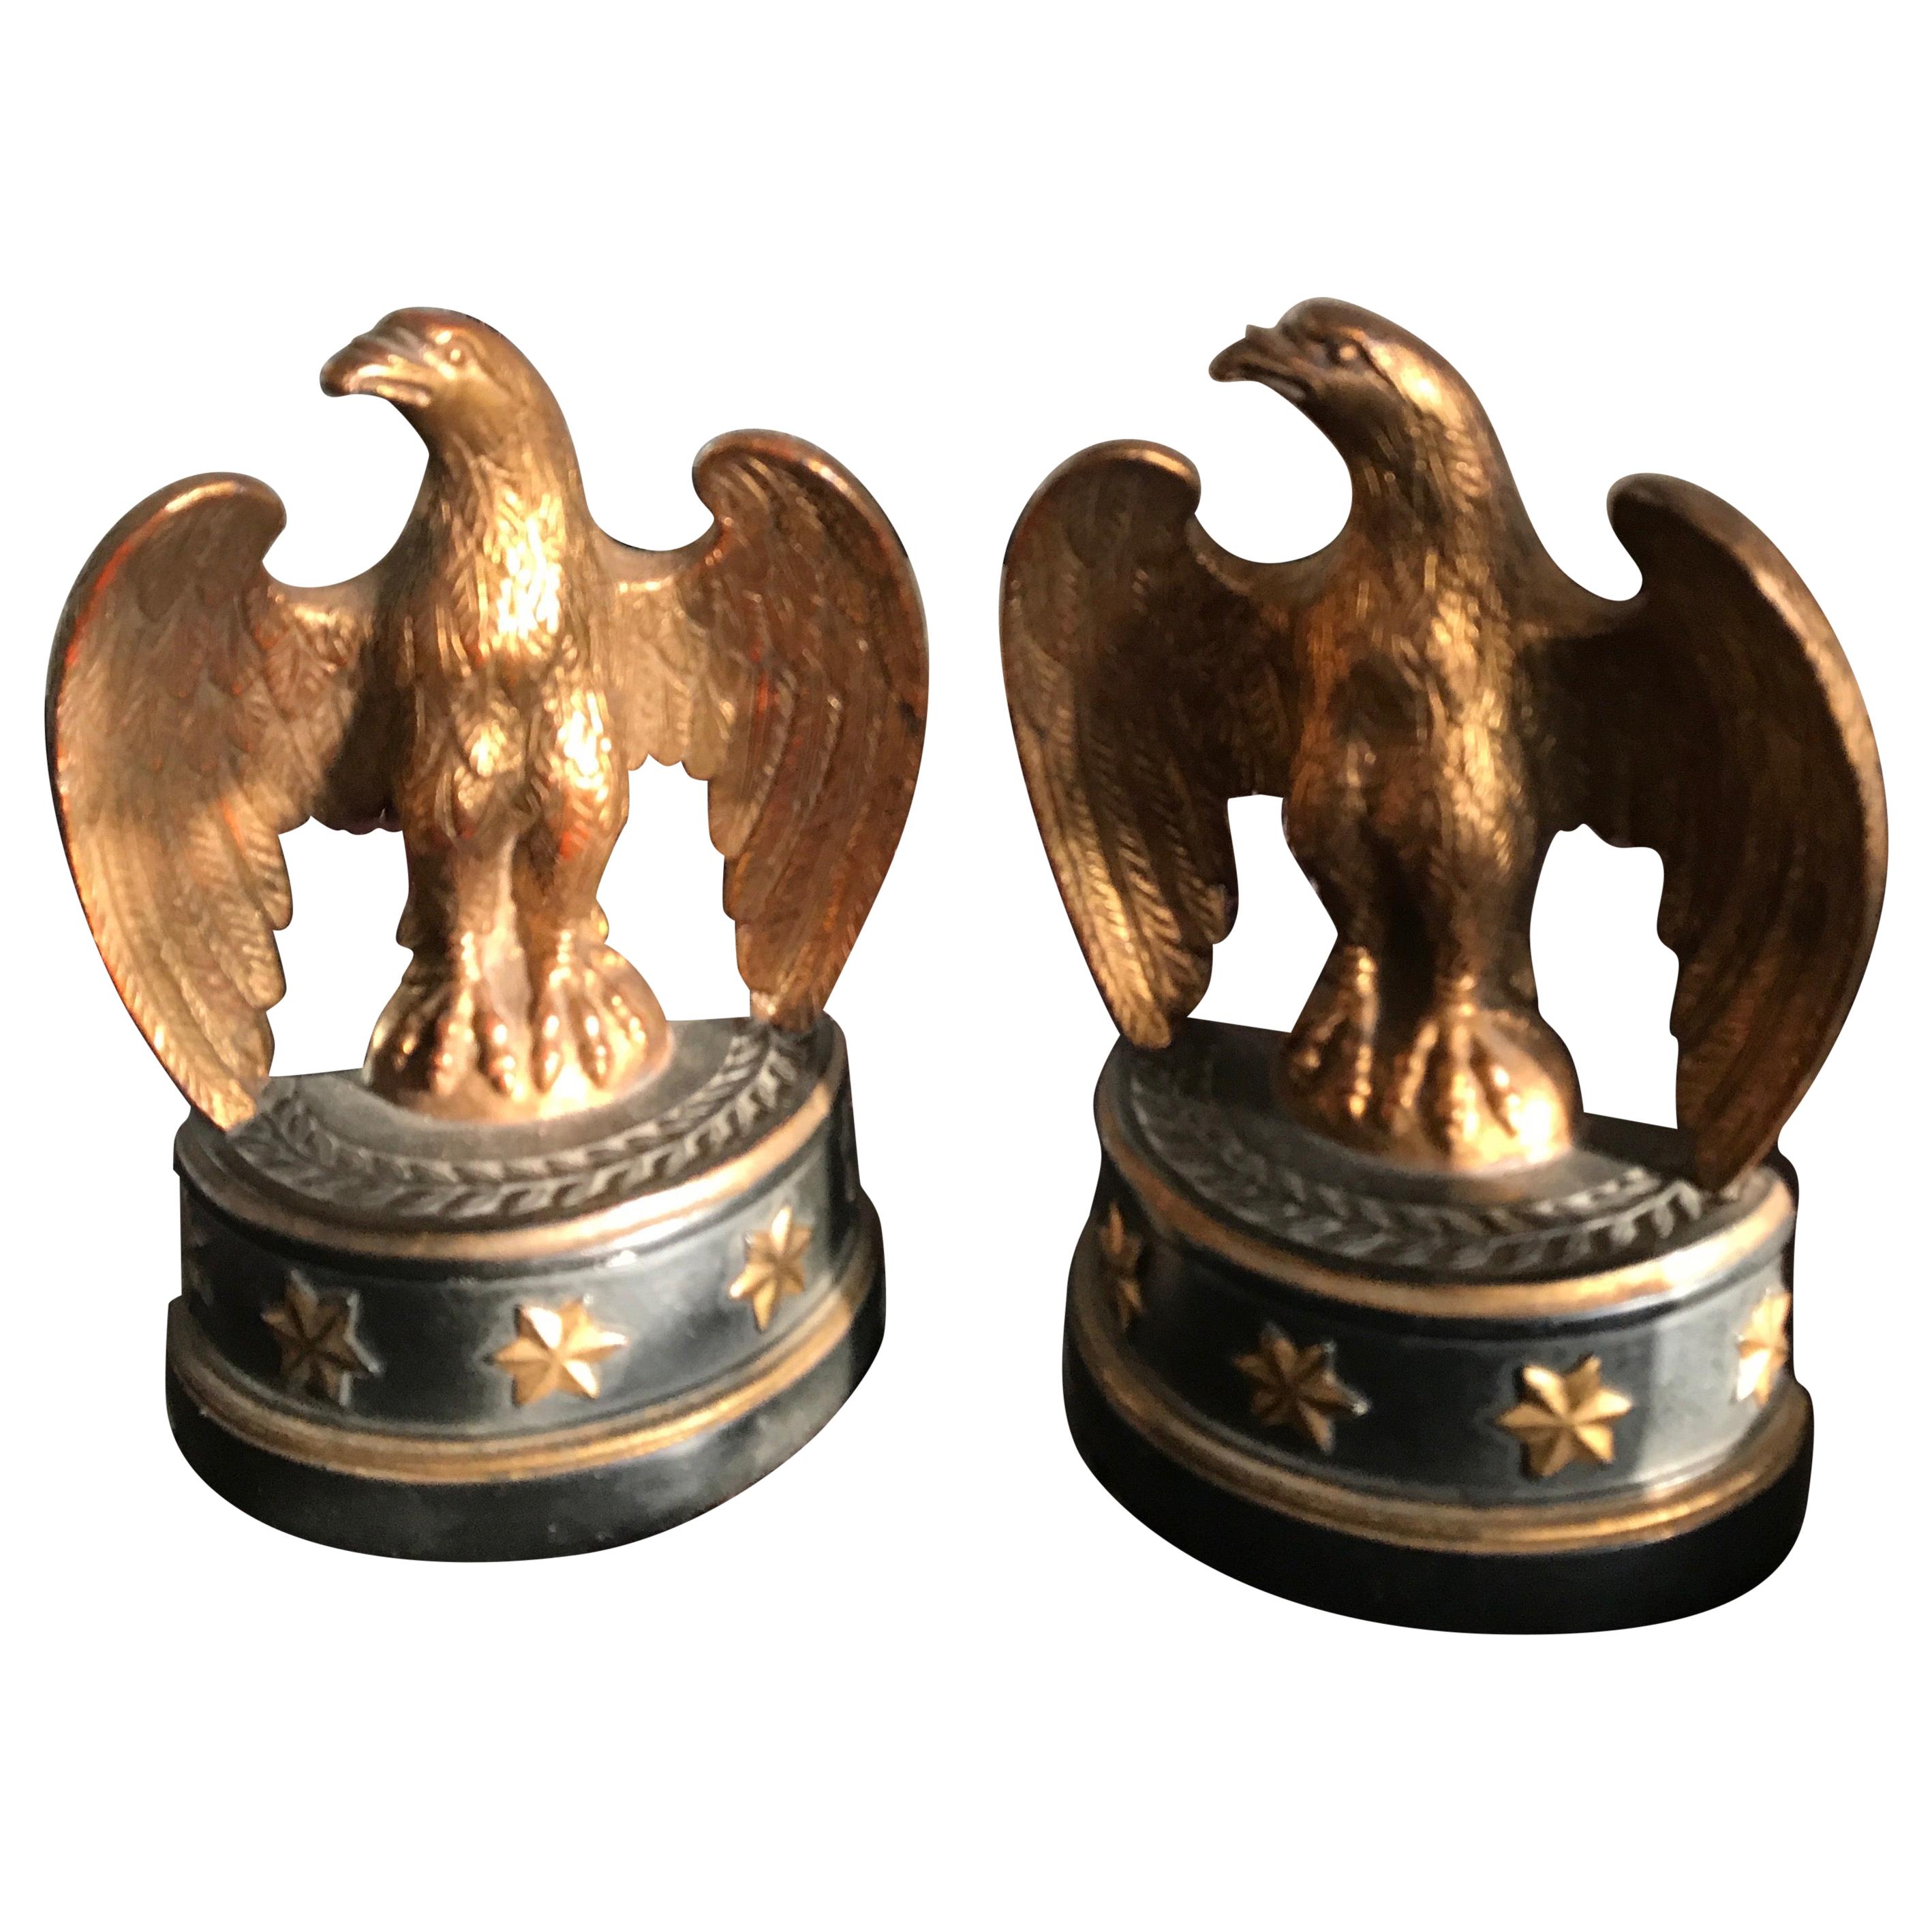 Pair of Gilded Eagle Bookends by Borghese